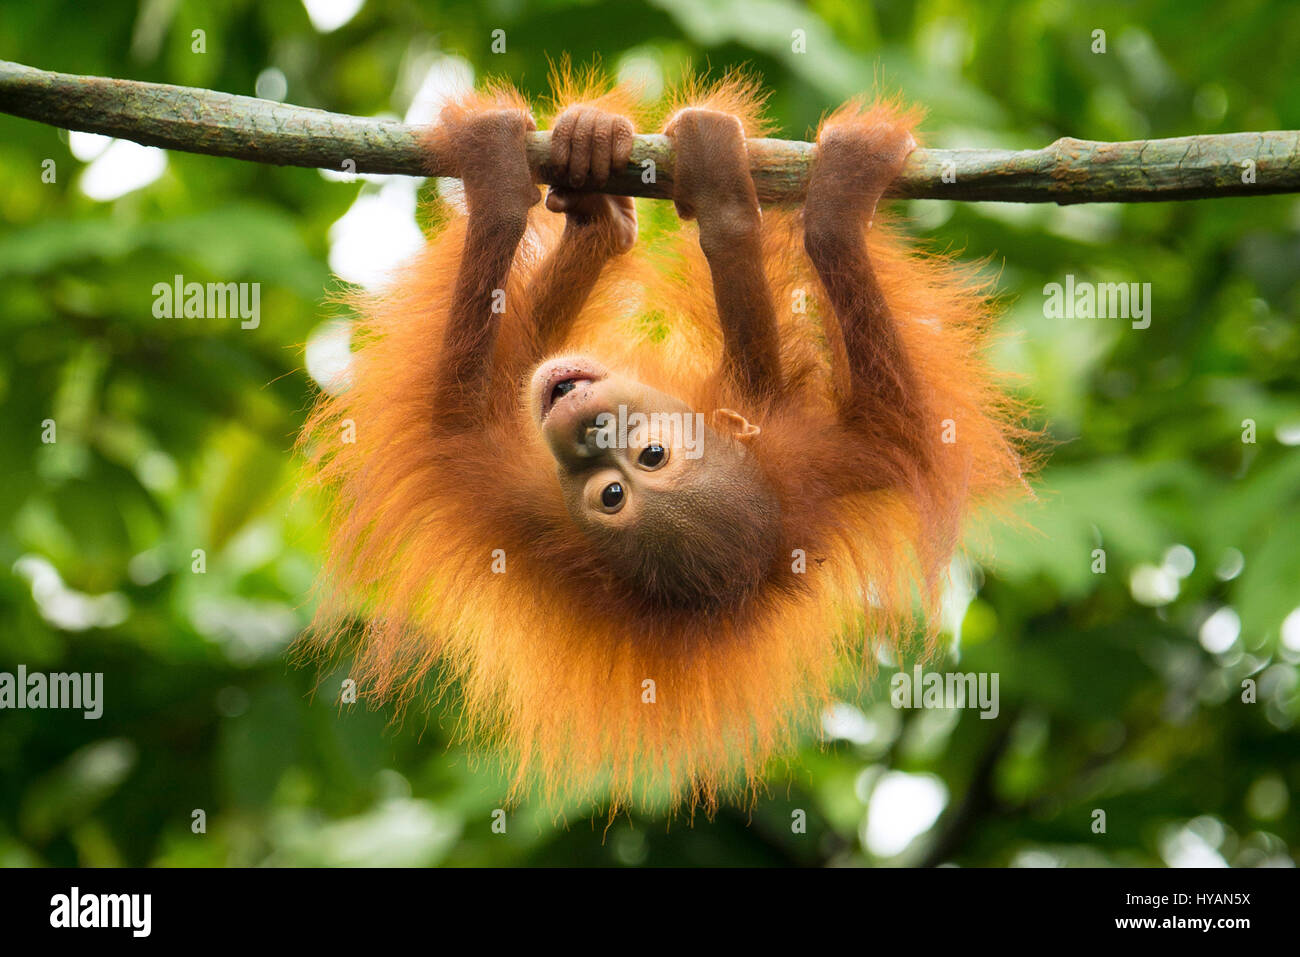 SINGAPORE: A BABY orang-utan looks like a right fur-ball as he dangles from the treetops. Other pictures show other members of the merry band of apes playing in the trees as a pair of orang-utans frolic together one pretends to be doing ballet while another does a mid-air wee. At the end of the day exhausted mum can only try to get some rest as the youngsters continue to swing around above her head. The heart-warming pictures were taken by Singapore photographer C.S. Ling (30) at the island’s Zoological Gardens. Stock Photo